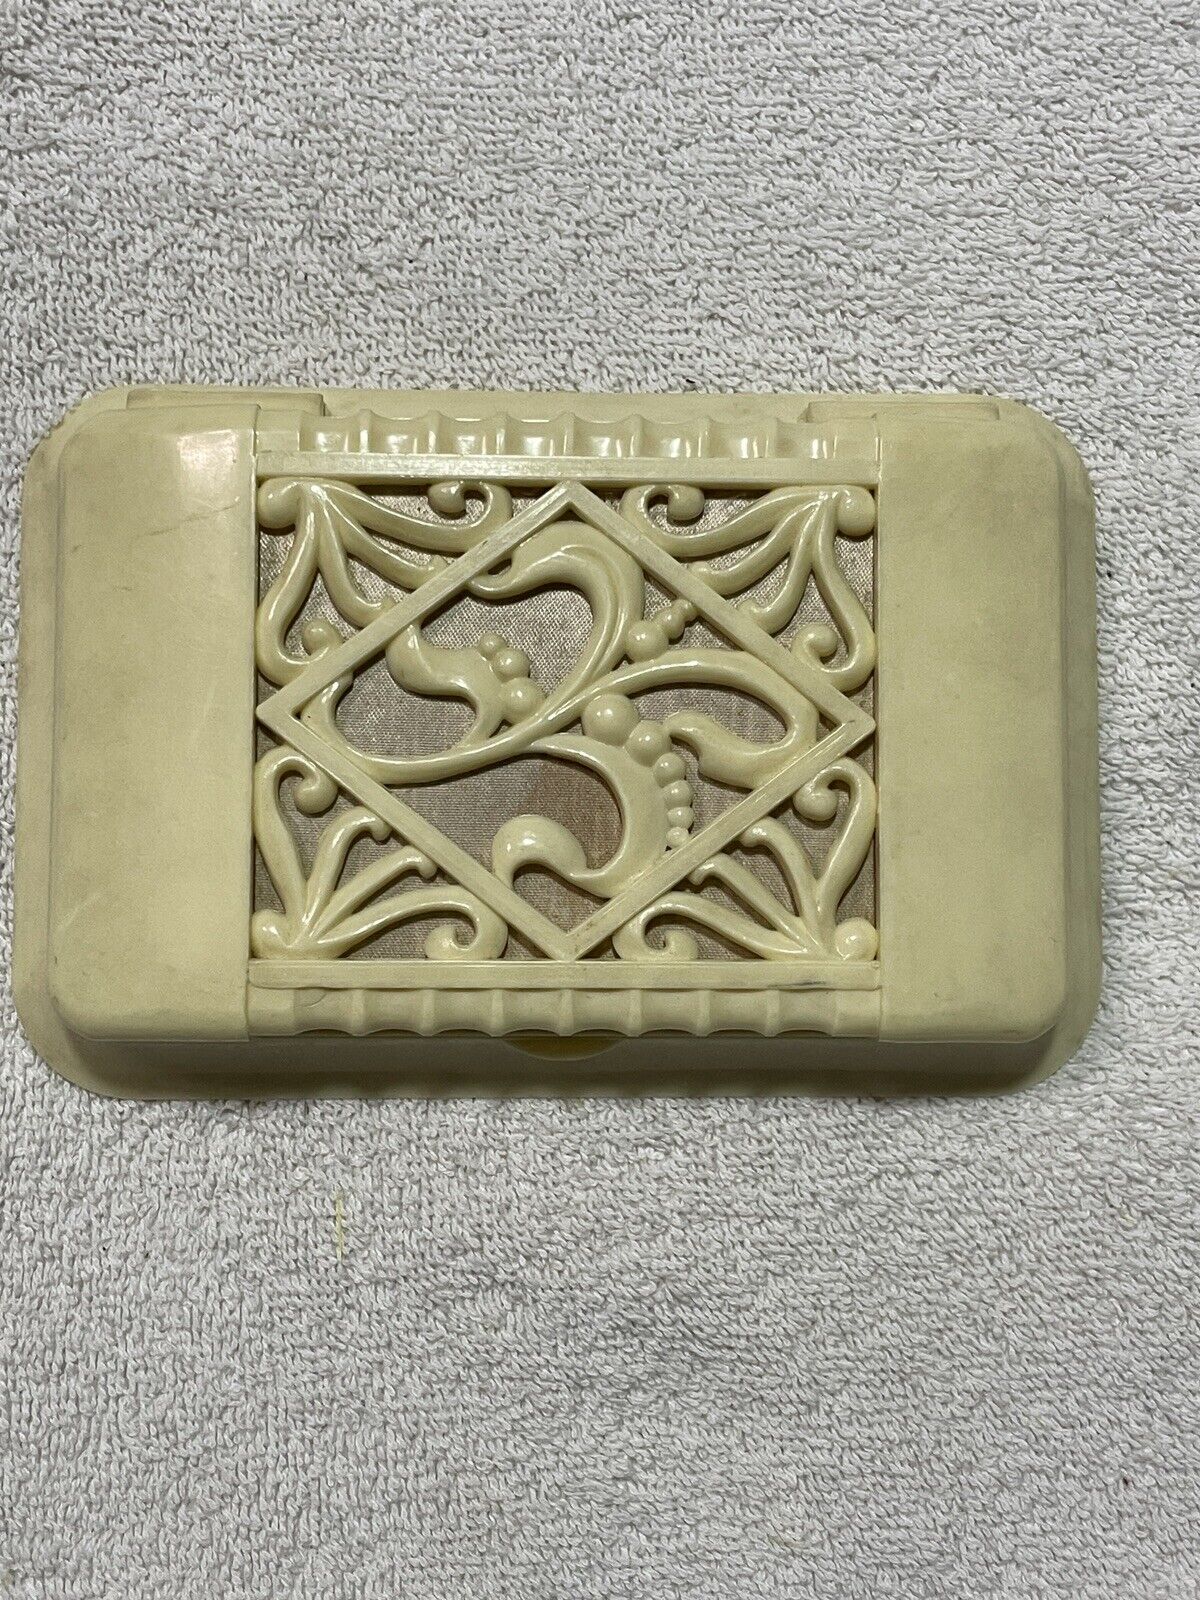 Vintage ~ Deltah Ivory Colored Lined Jewelry Box / Case